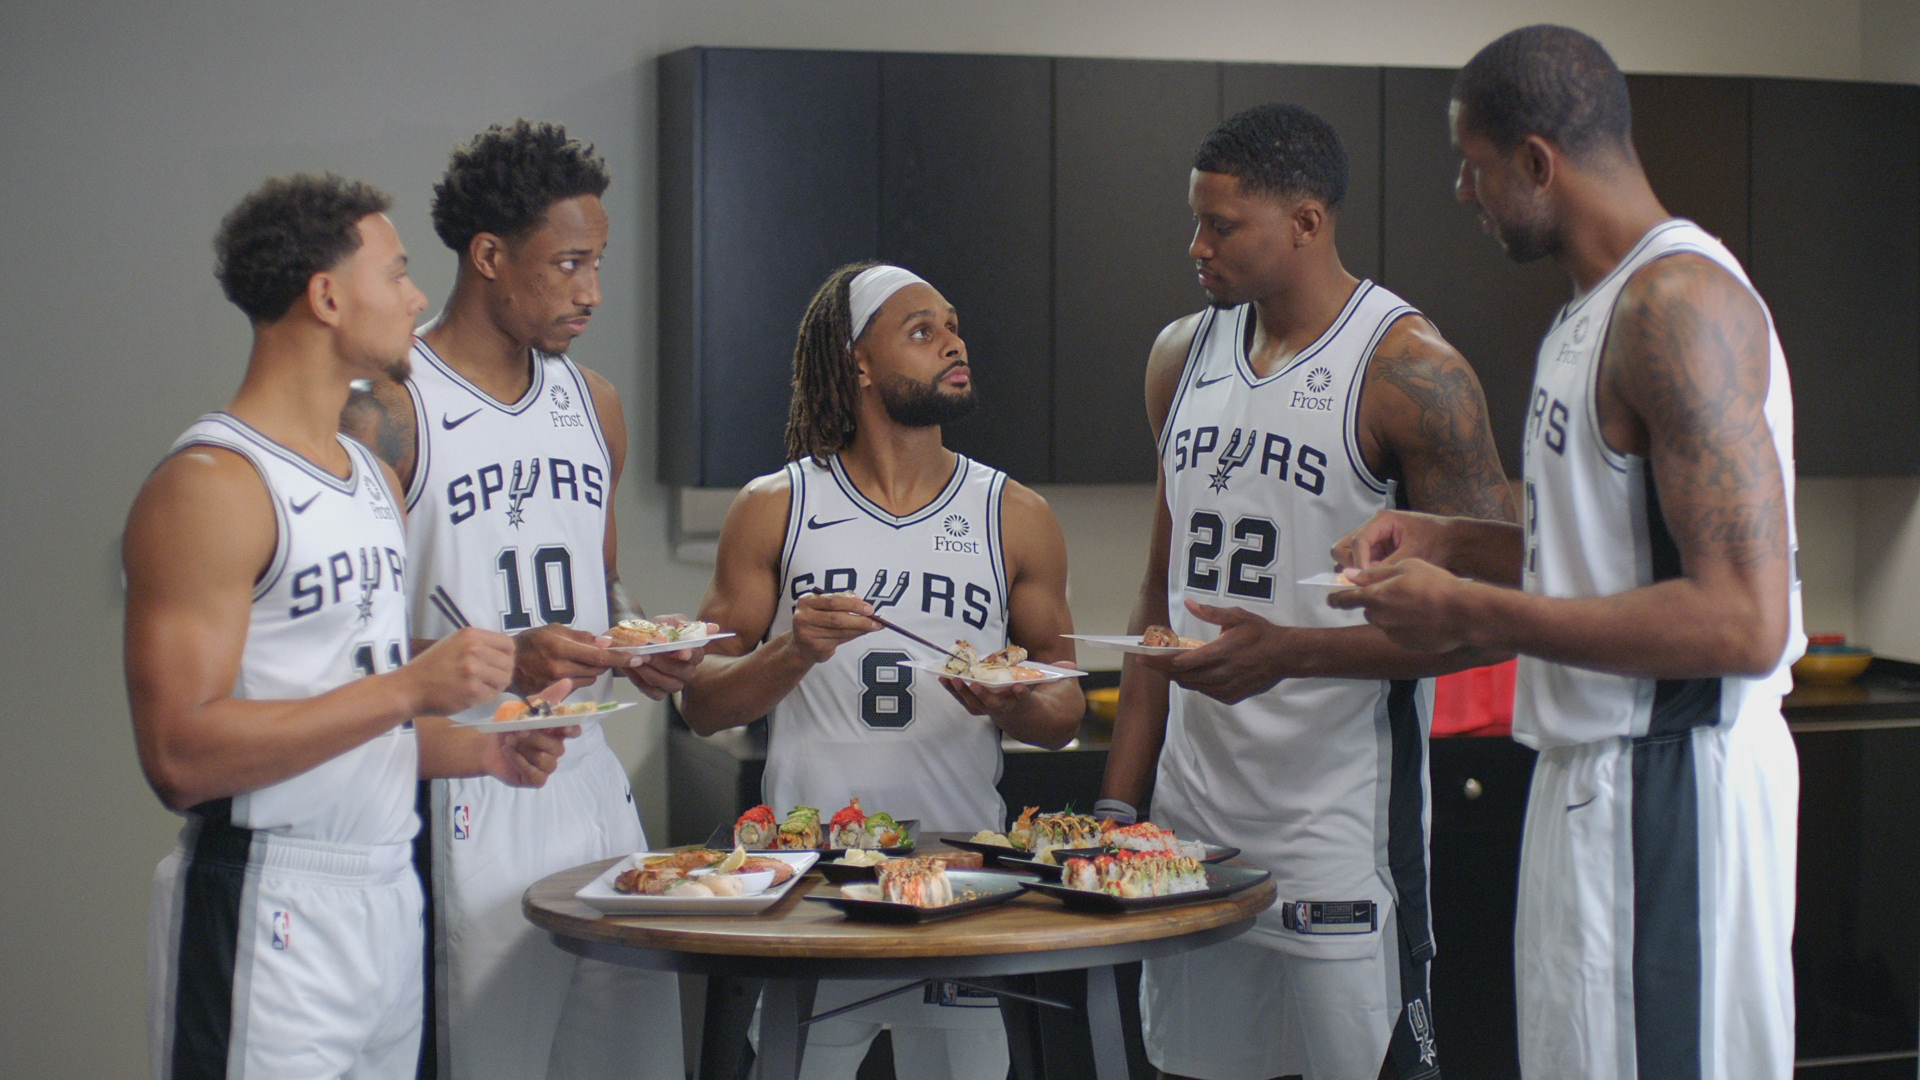 H-E-B and San Antonio Spurs hit nothing but net with new commercials - H-E-B  Newsroom